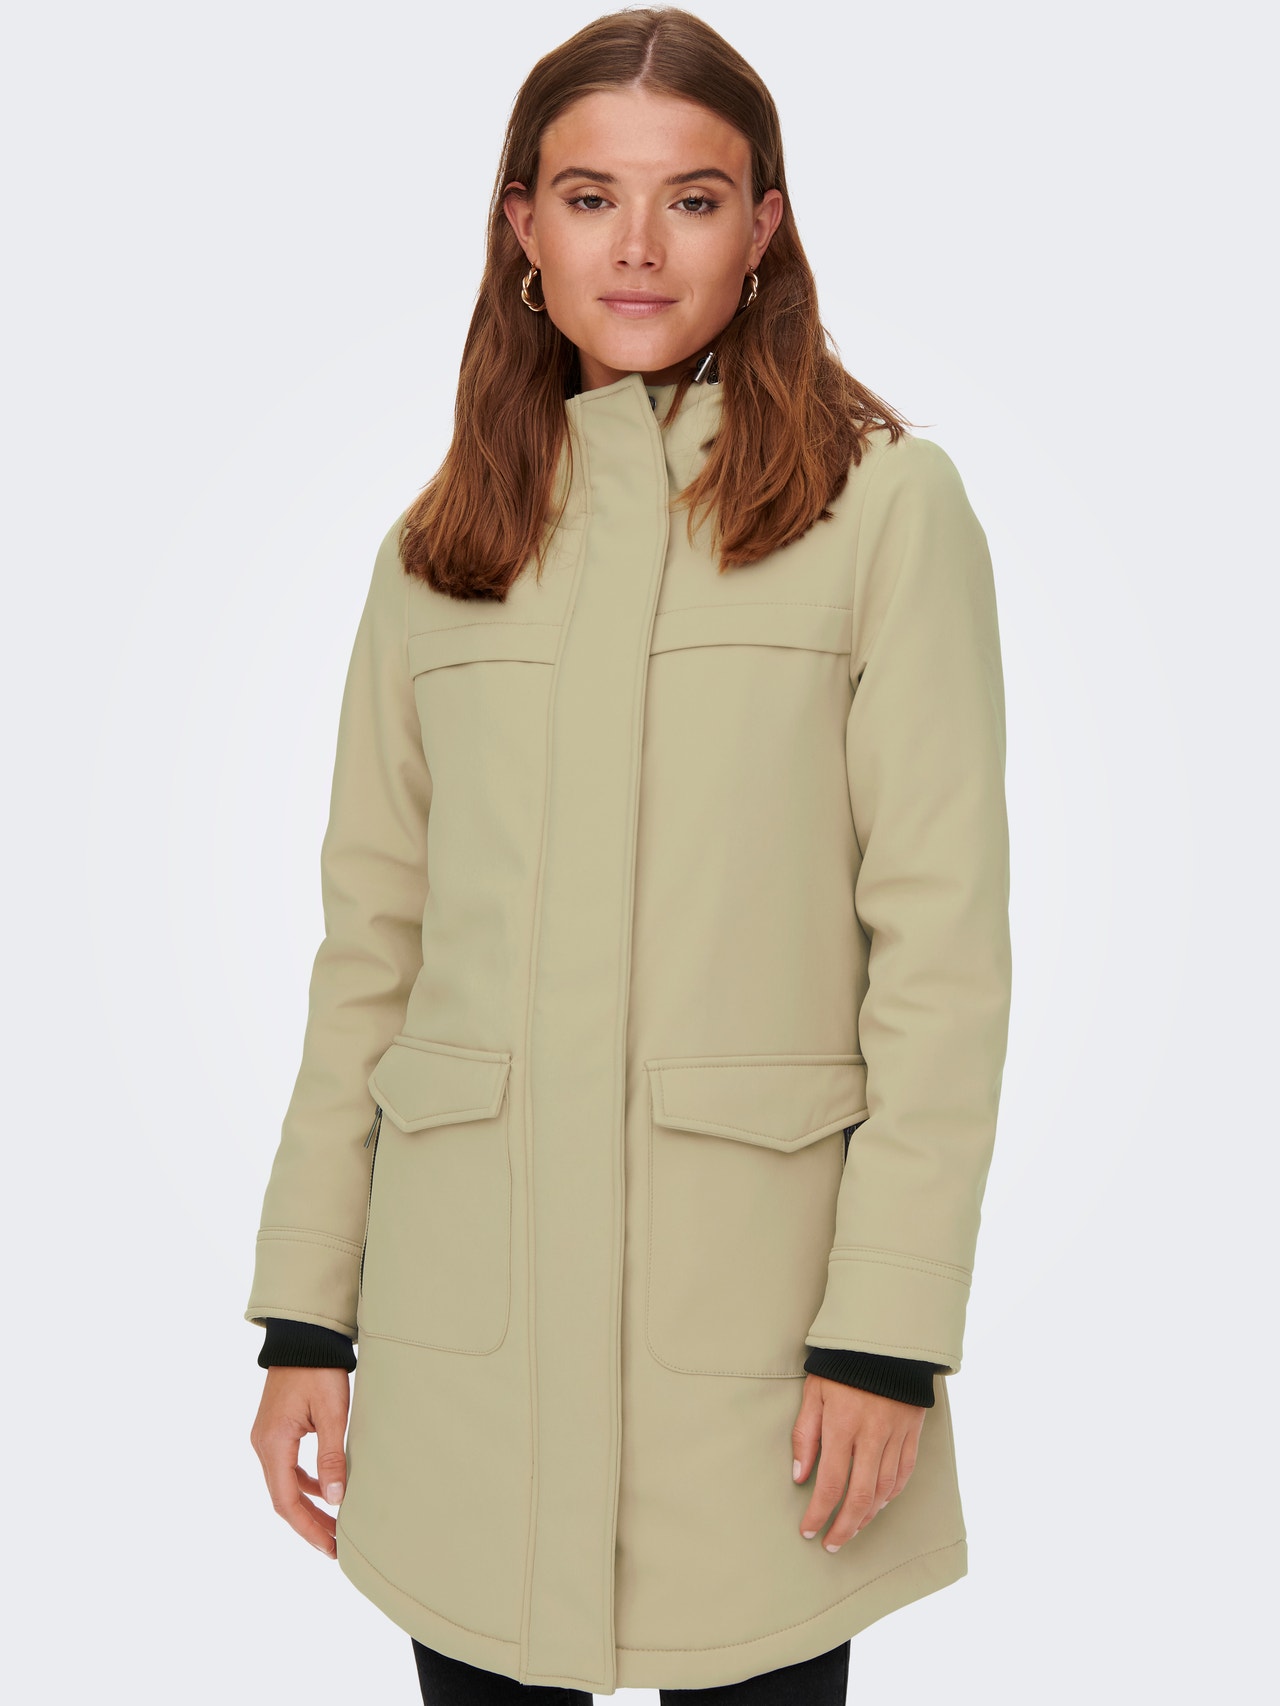 ONLY Long jacket with pockets -Nomad - 15192522